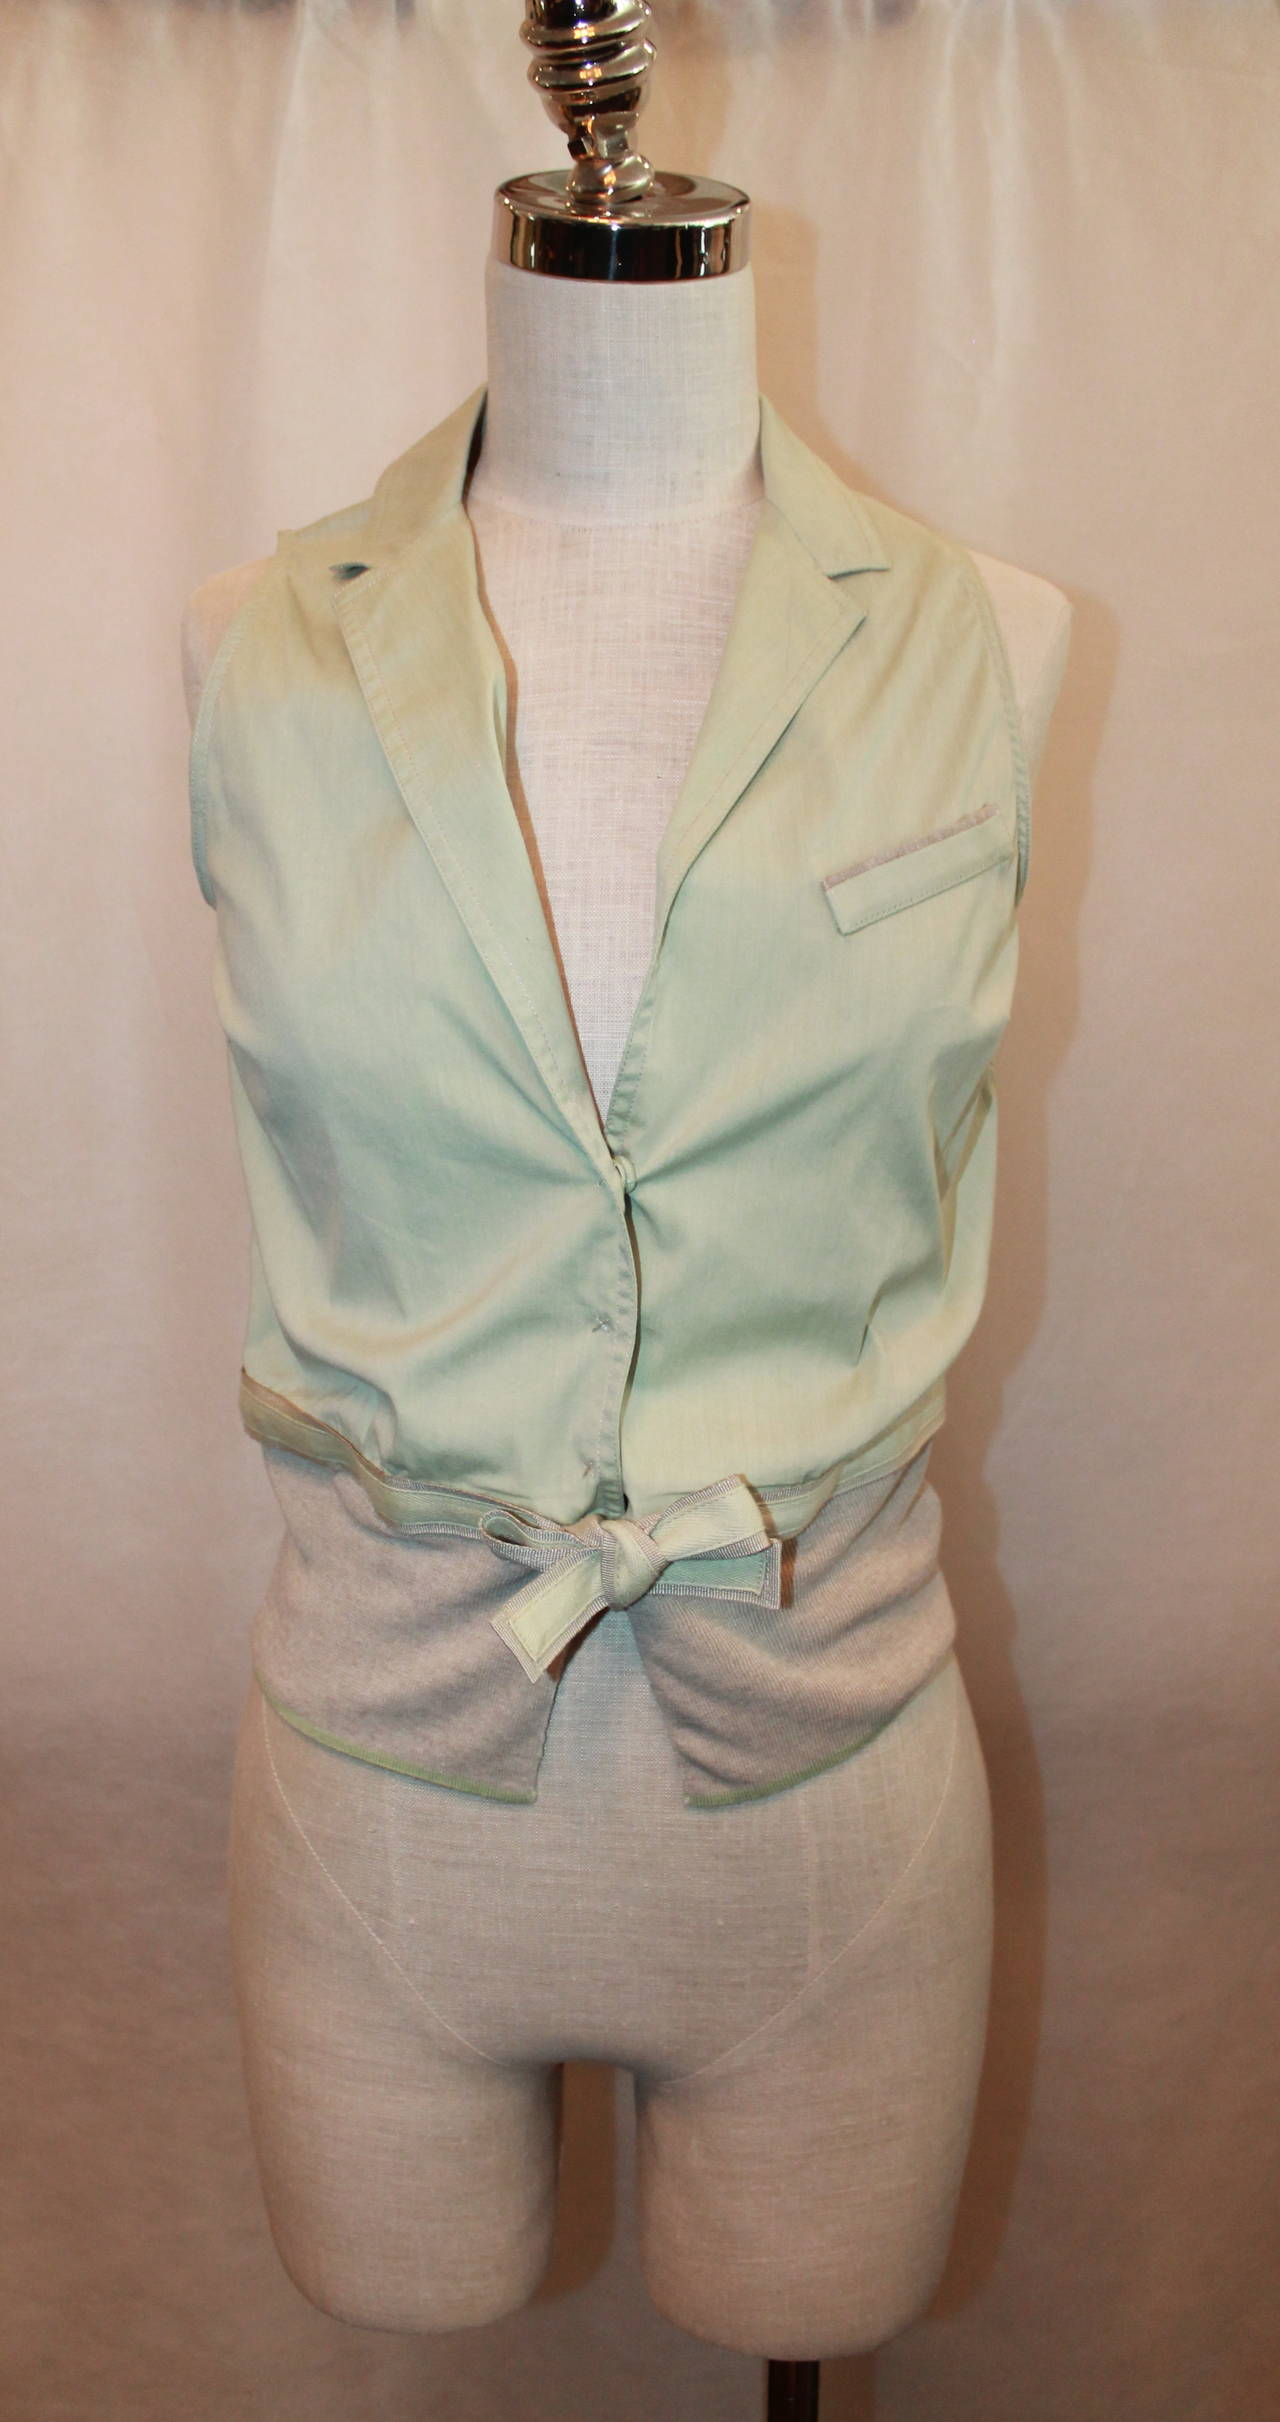 Brunello Cucinelli Pastel Green & Beige Linen Blouse - S. This blouse is in excellent condition and buttons up. The bottom is a tight, stretch material and ties. 

Measurements:
Bust- 34